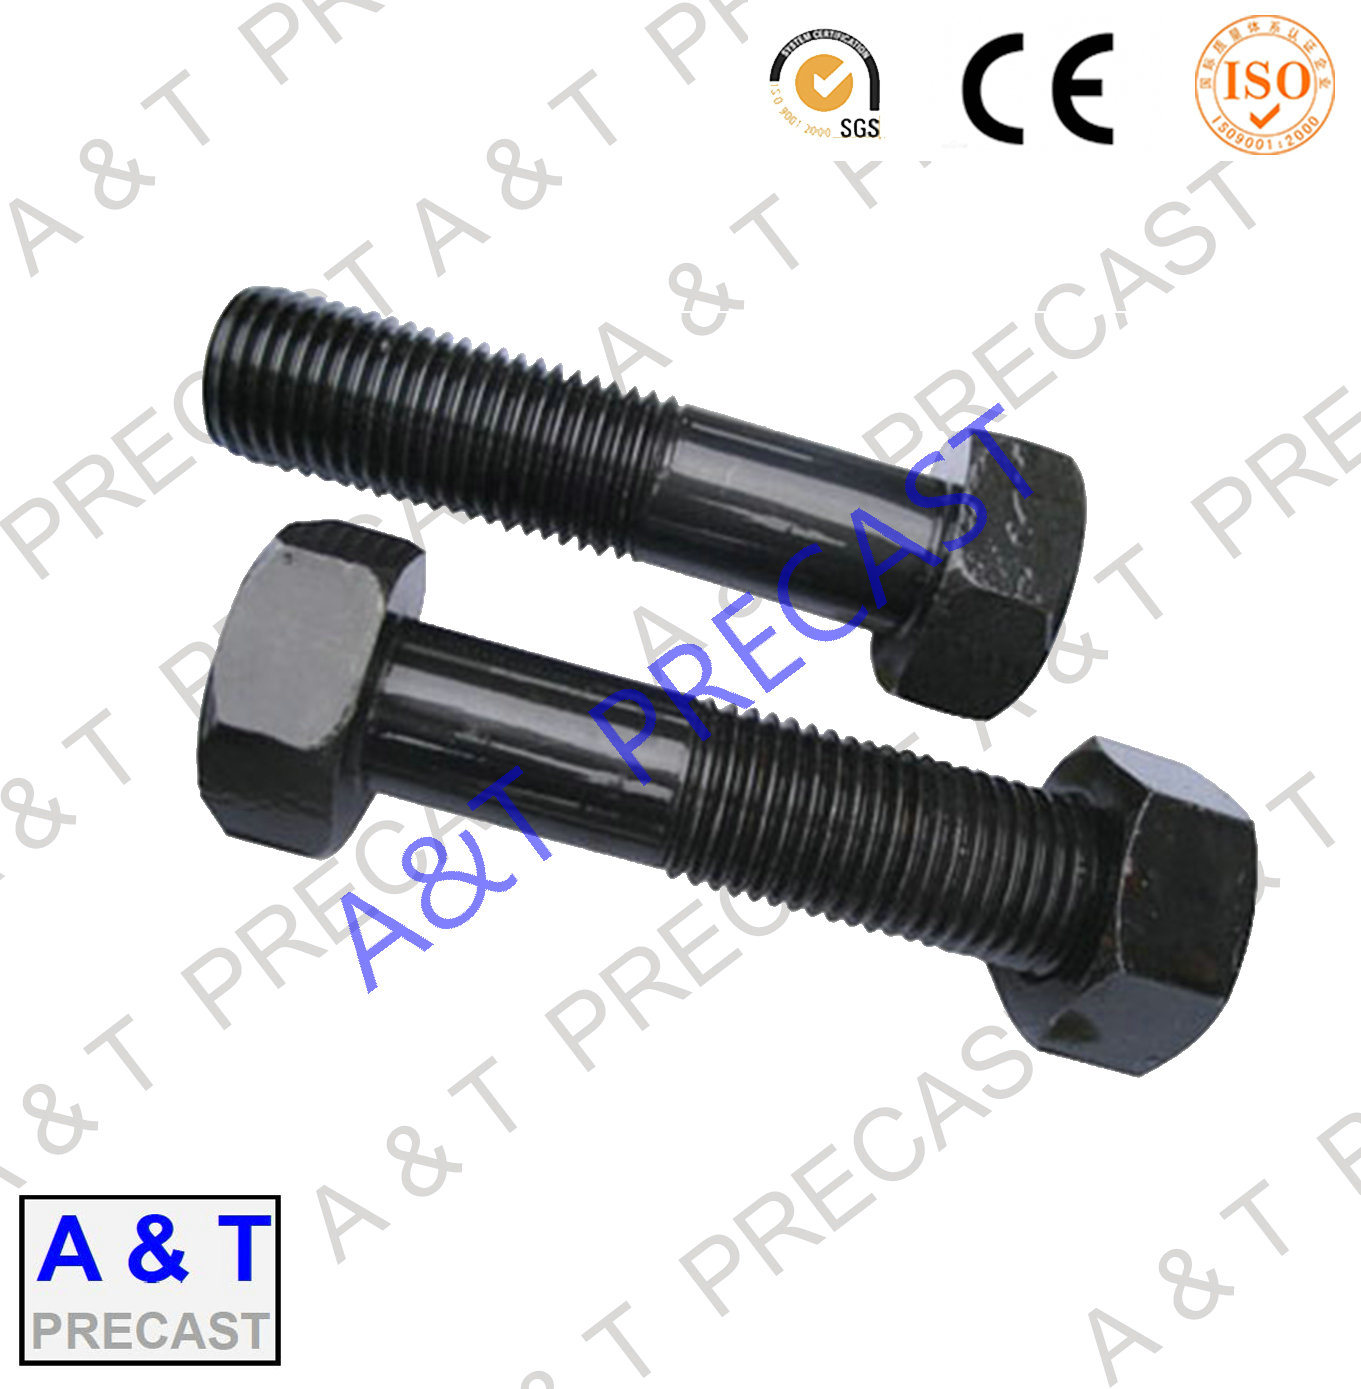 at Carbon Steel/Stainless Steel /Steel/Hex Bolt (M16)